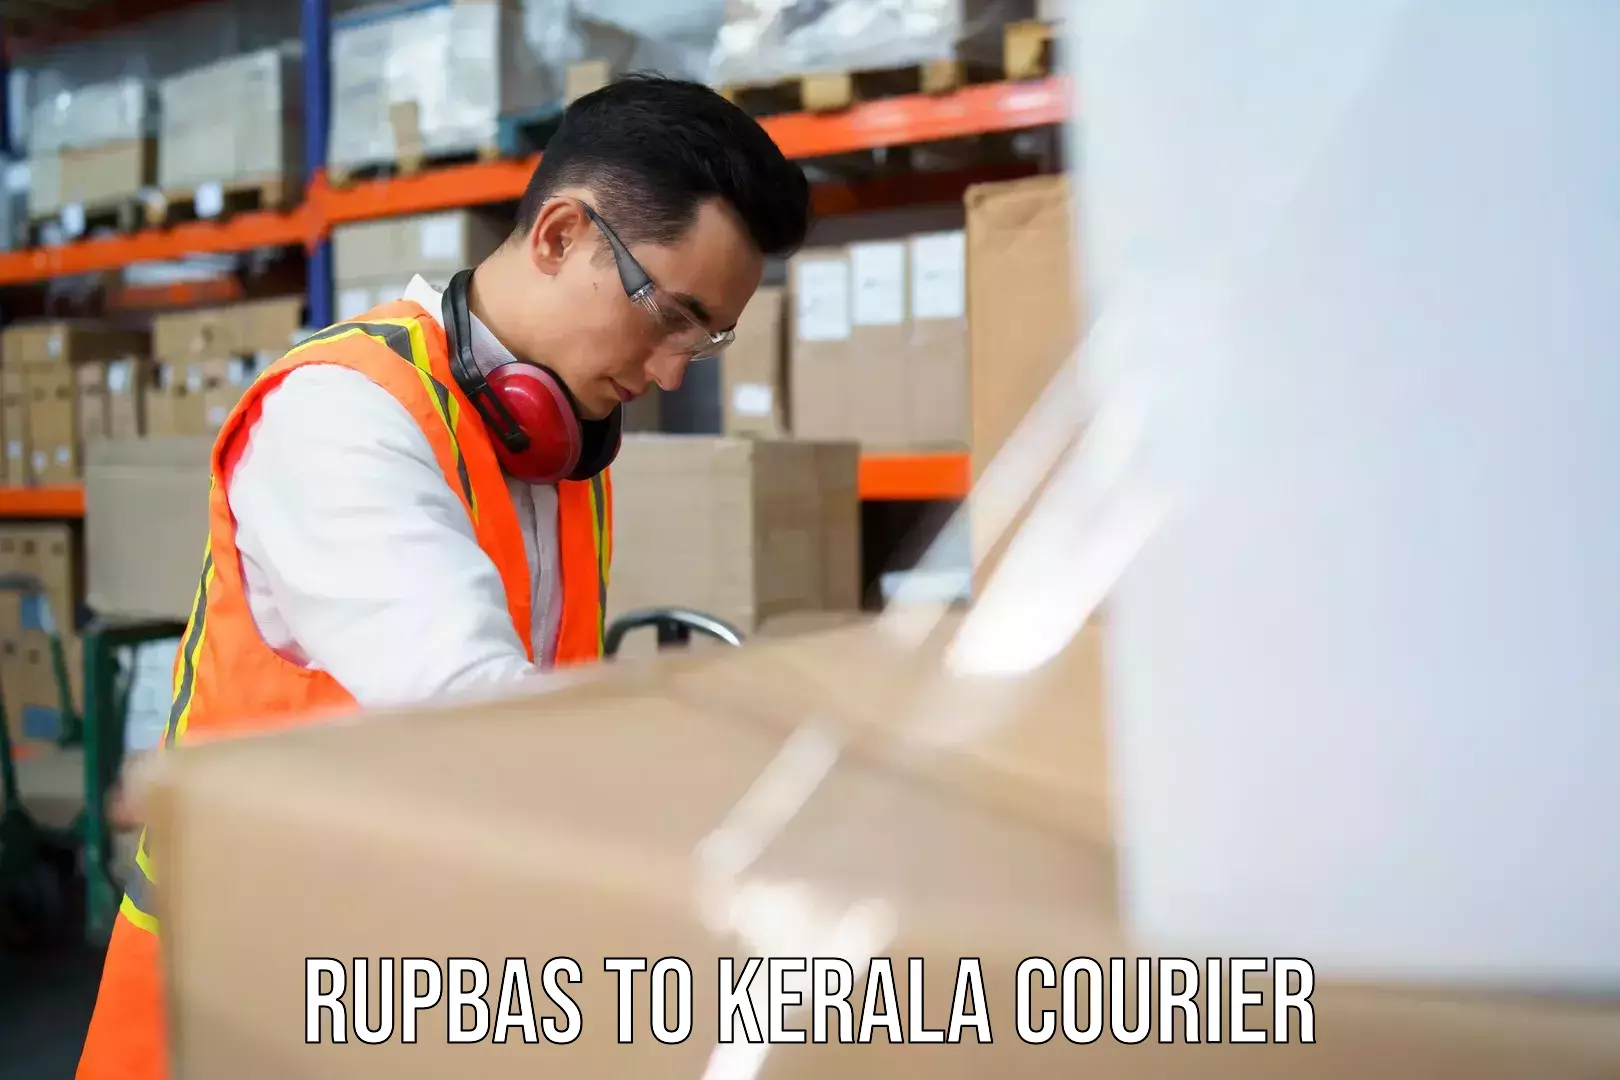 On-call courier service Rupbas to Kerala